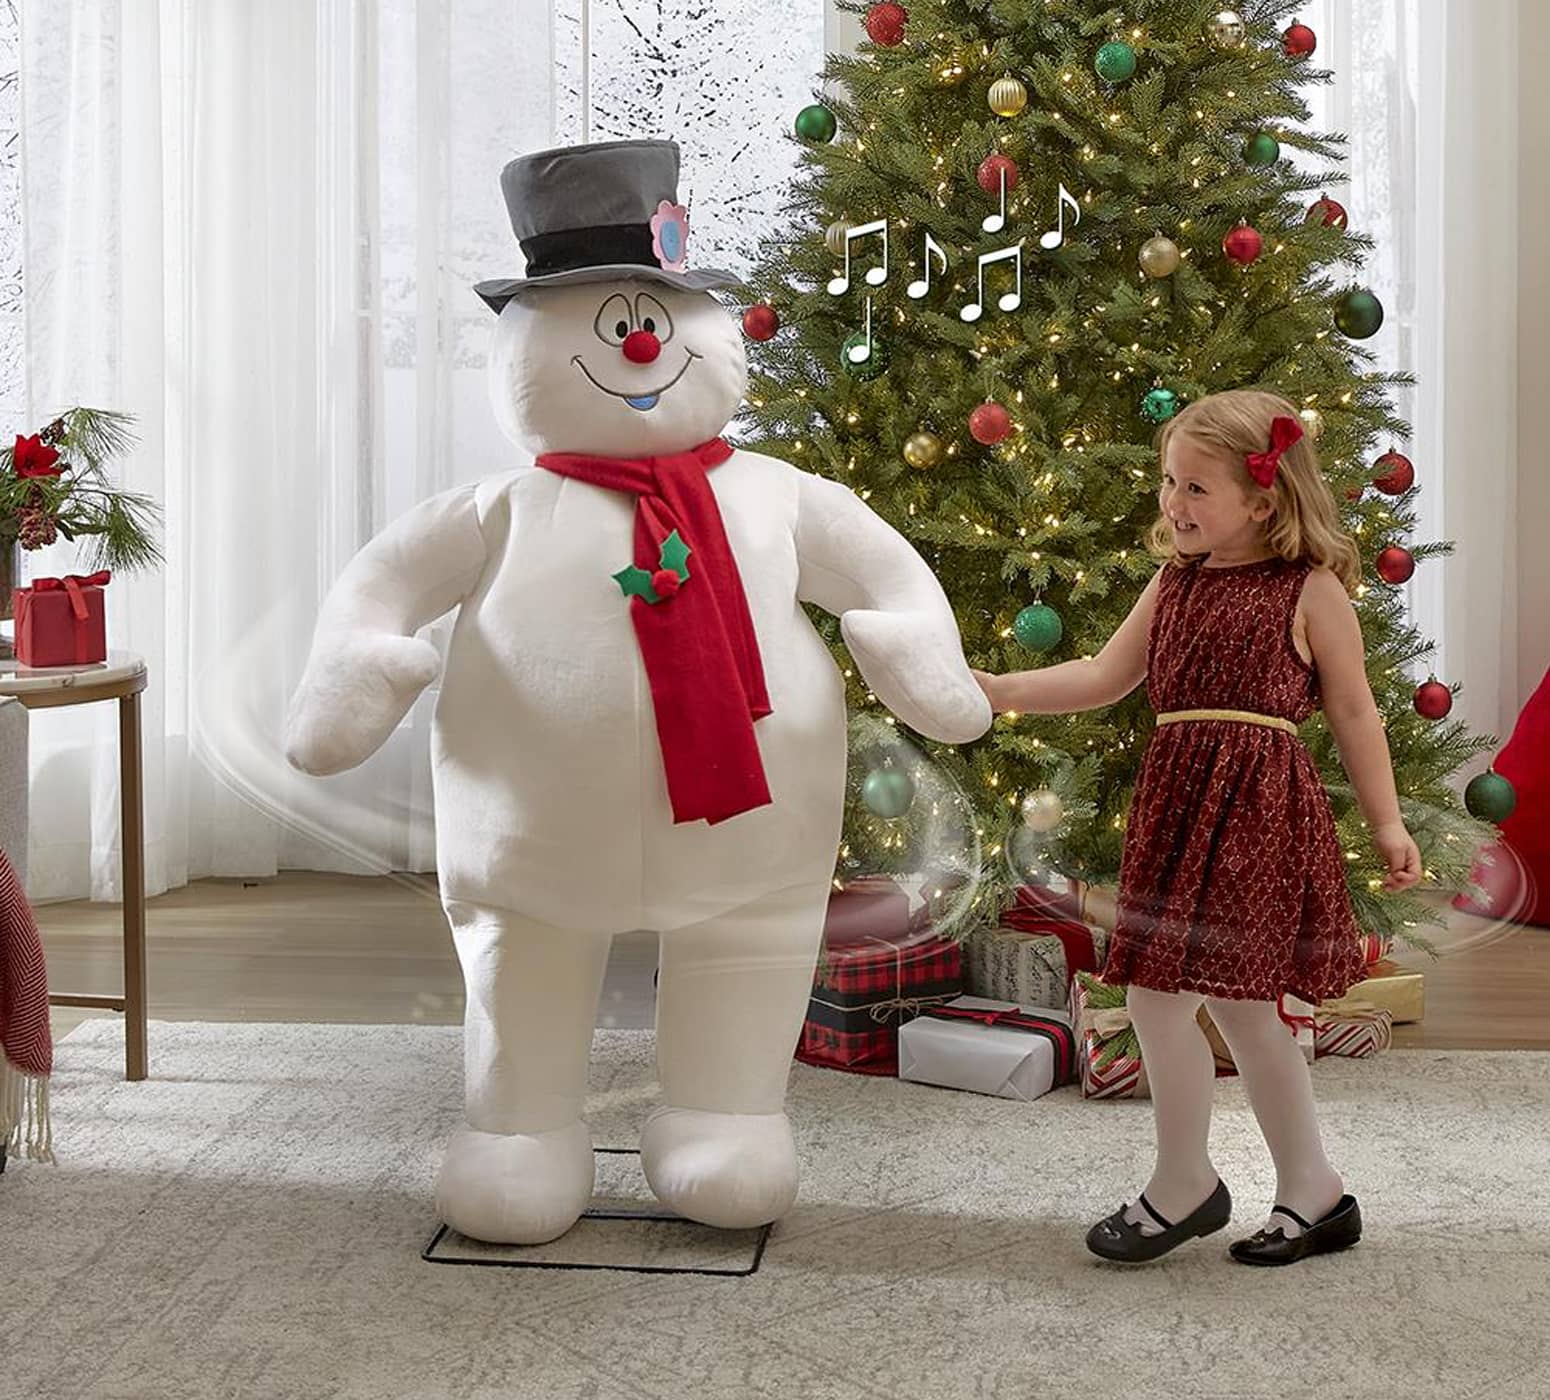 Life-Sized Animated Frosty the Snowman Statue